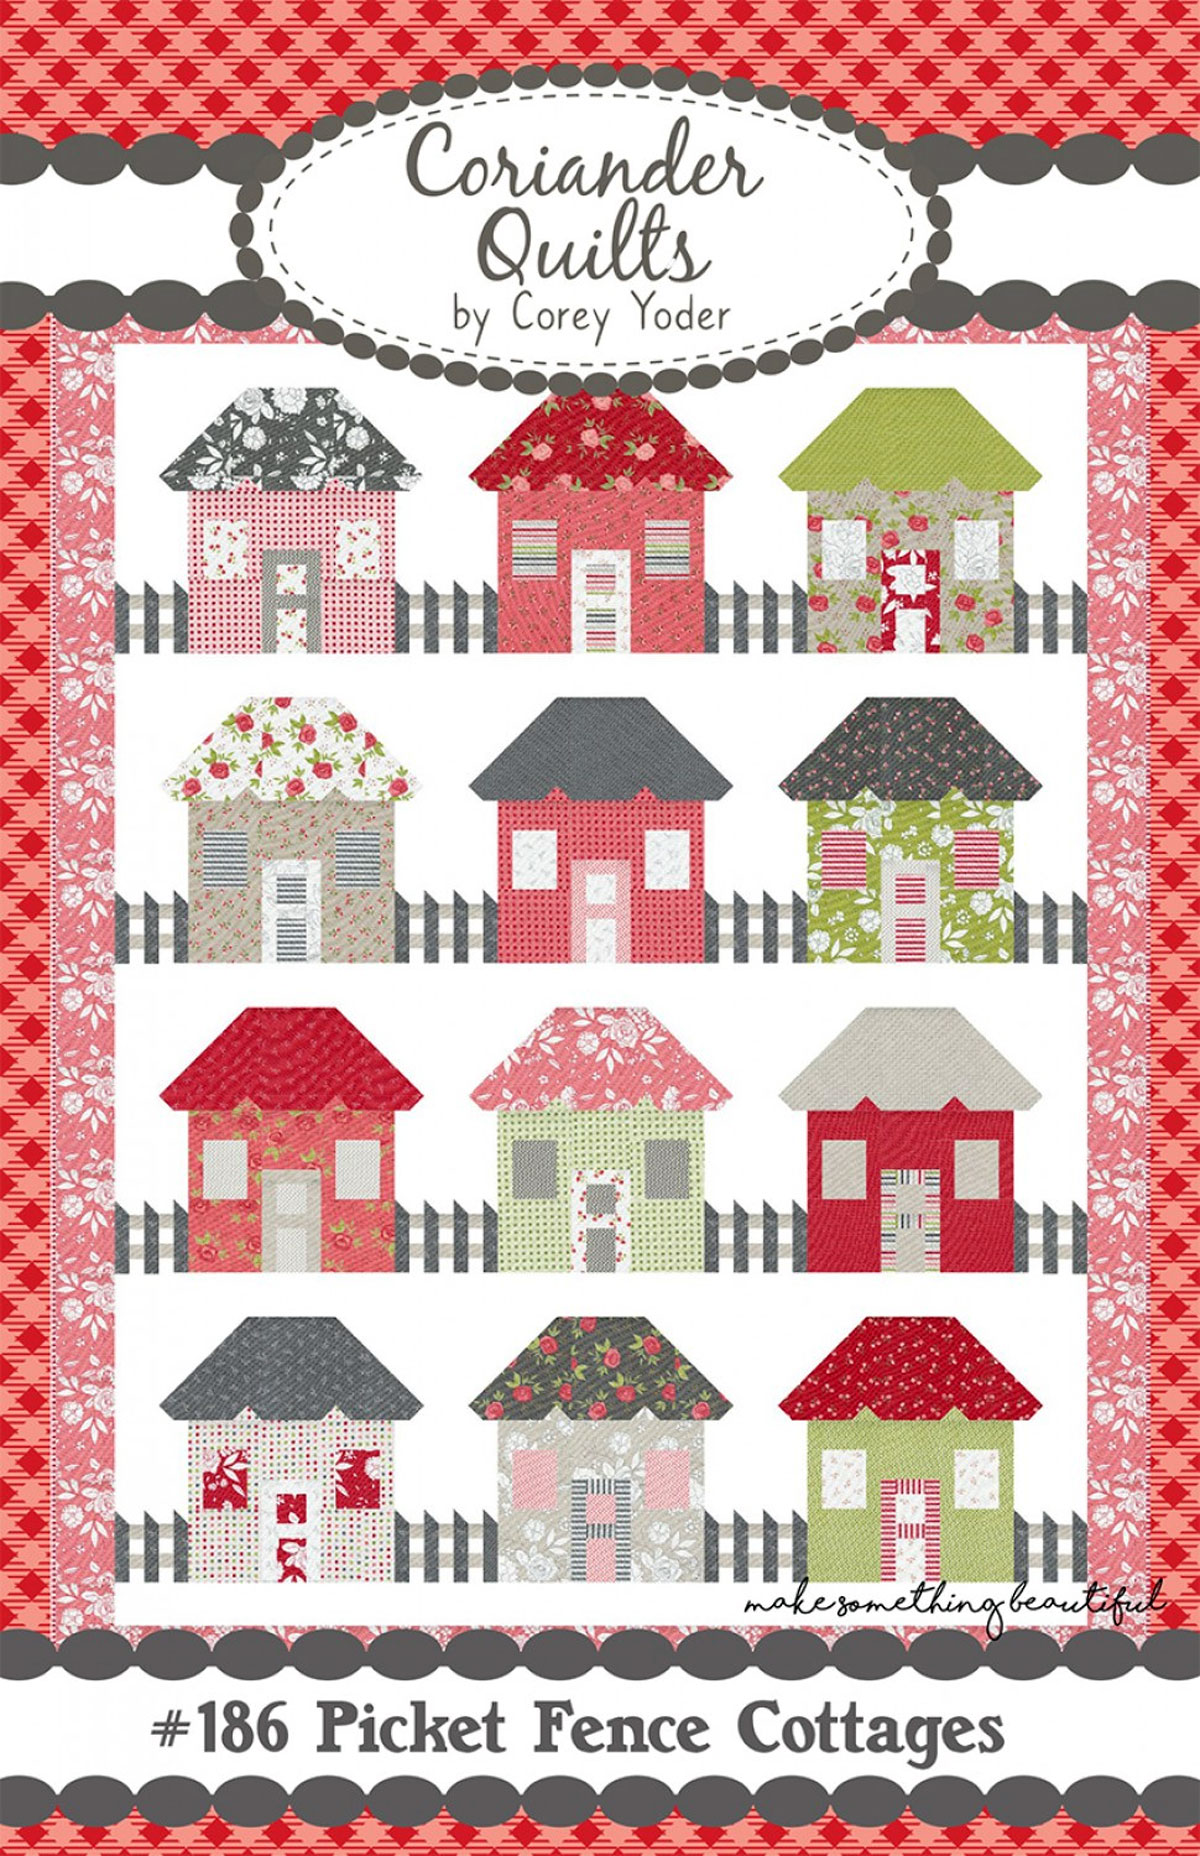 Picket-Fence-Cottages-quilt-sewing-pattern-Coriander-Quilts-front